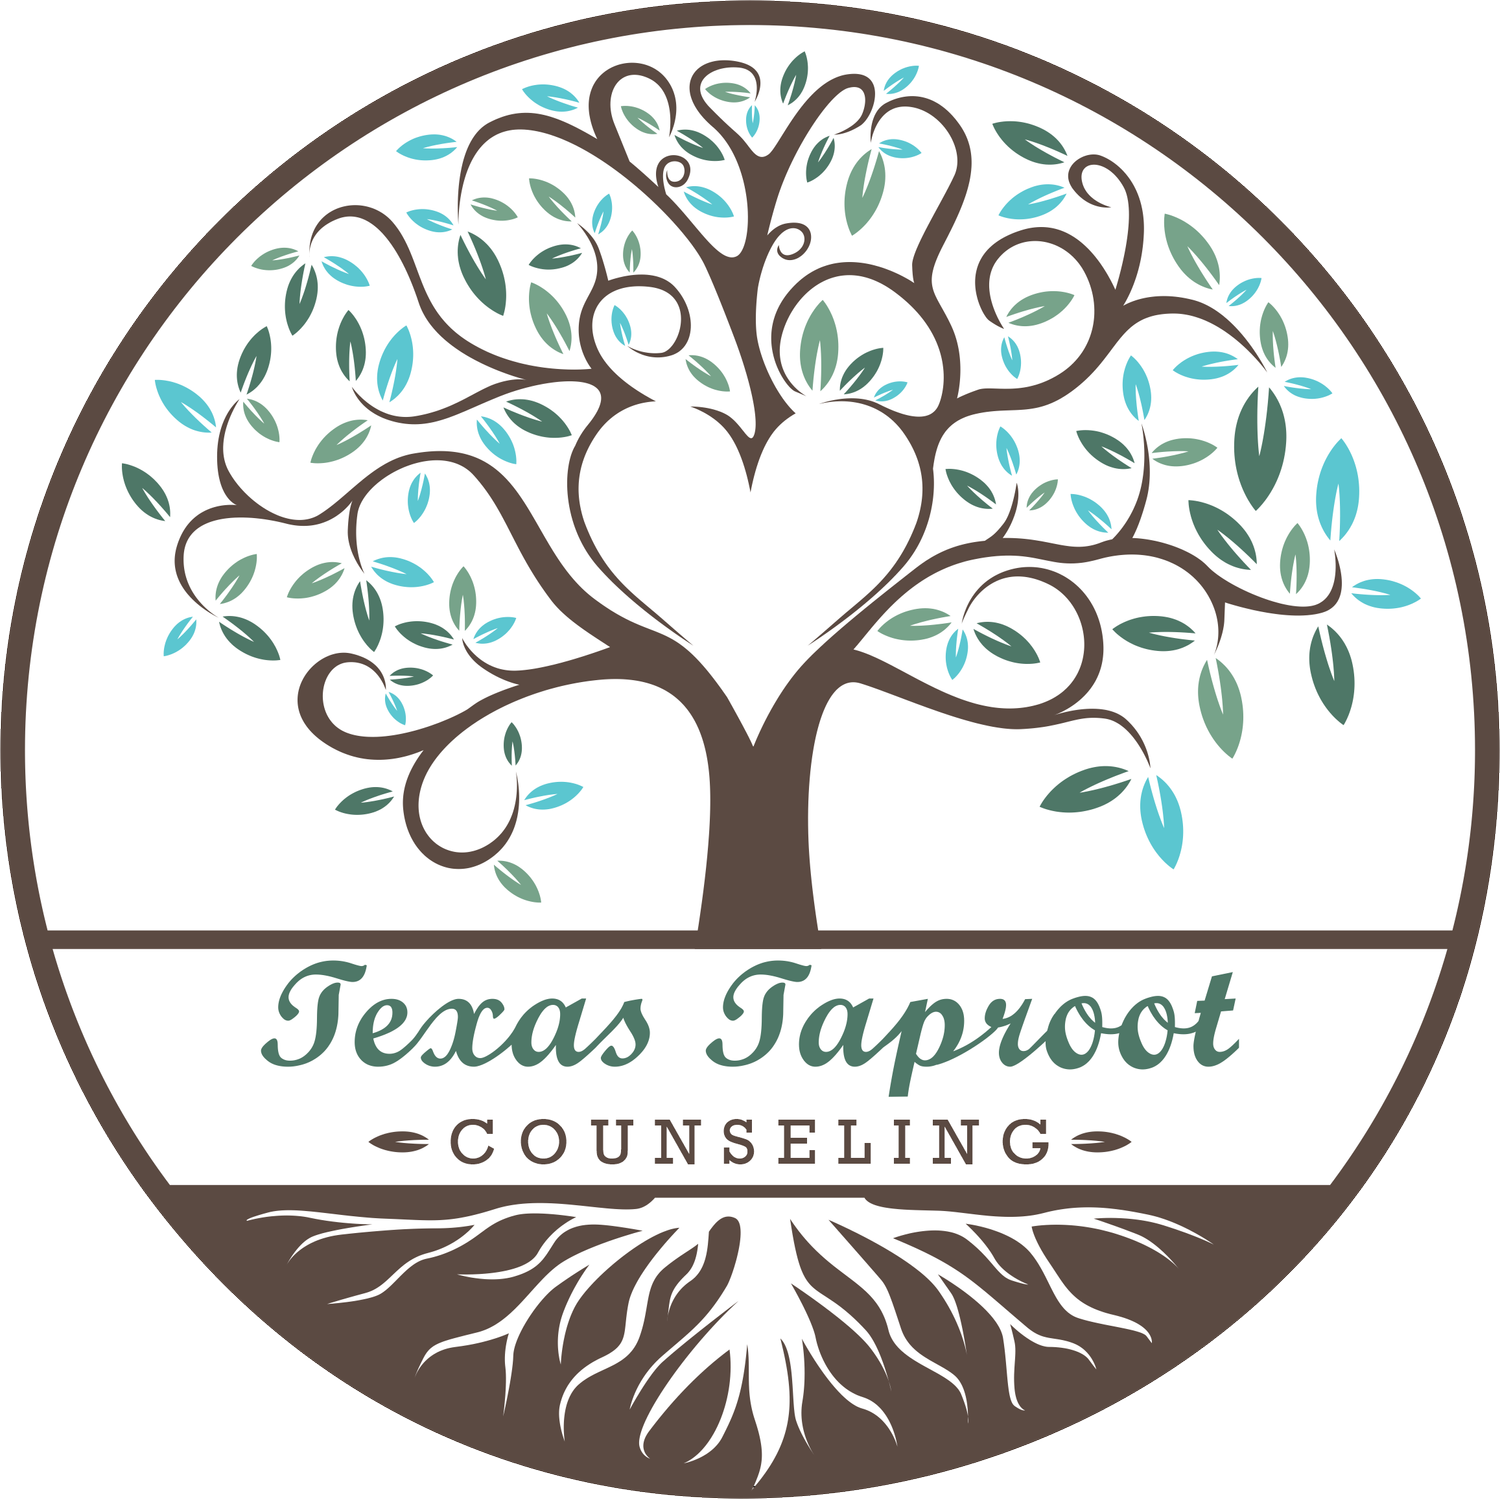 Texas Taproot Counseling